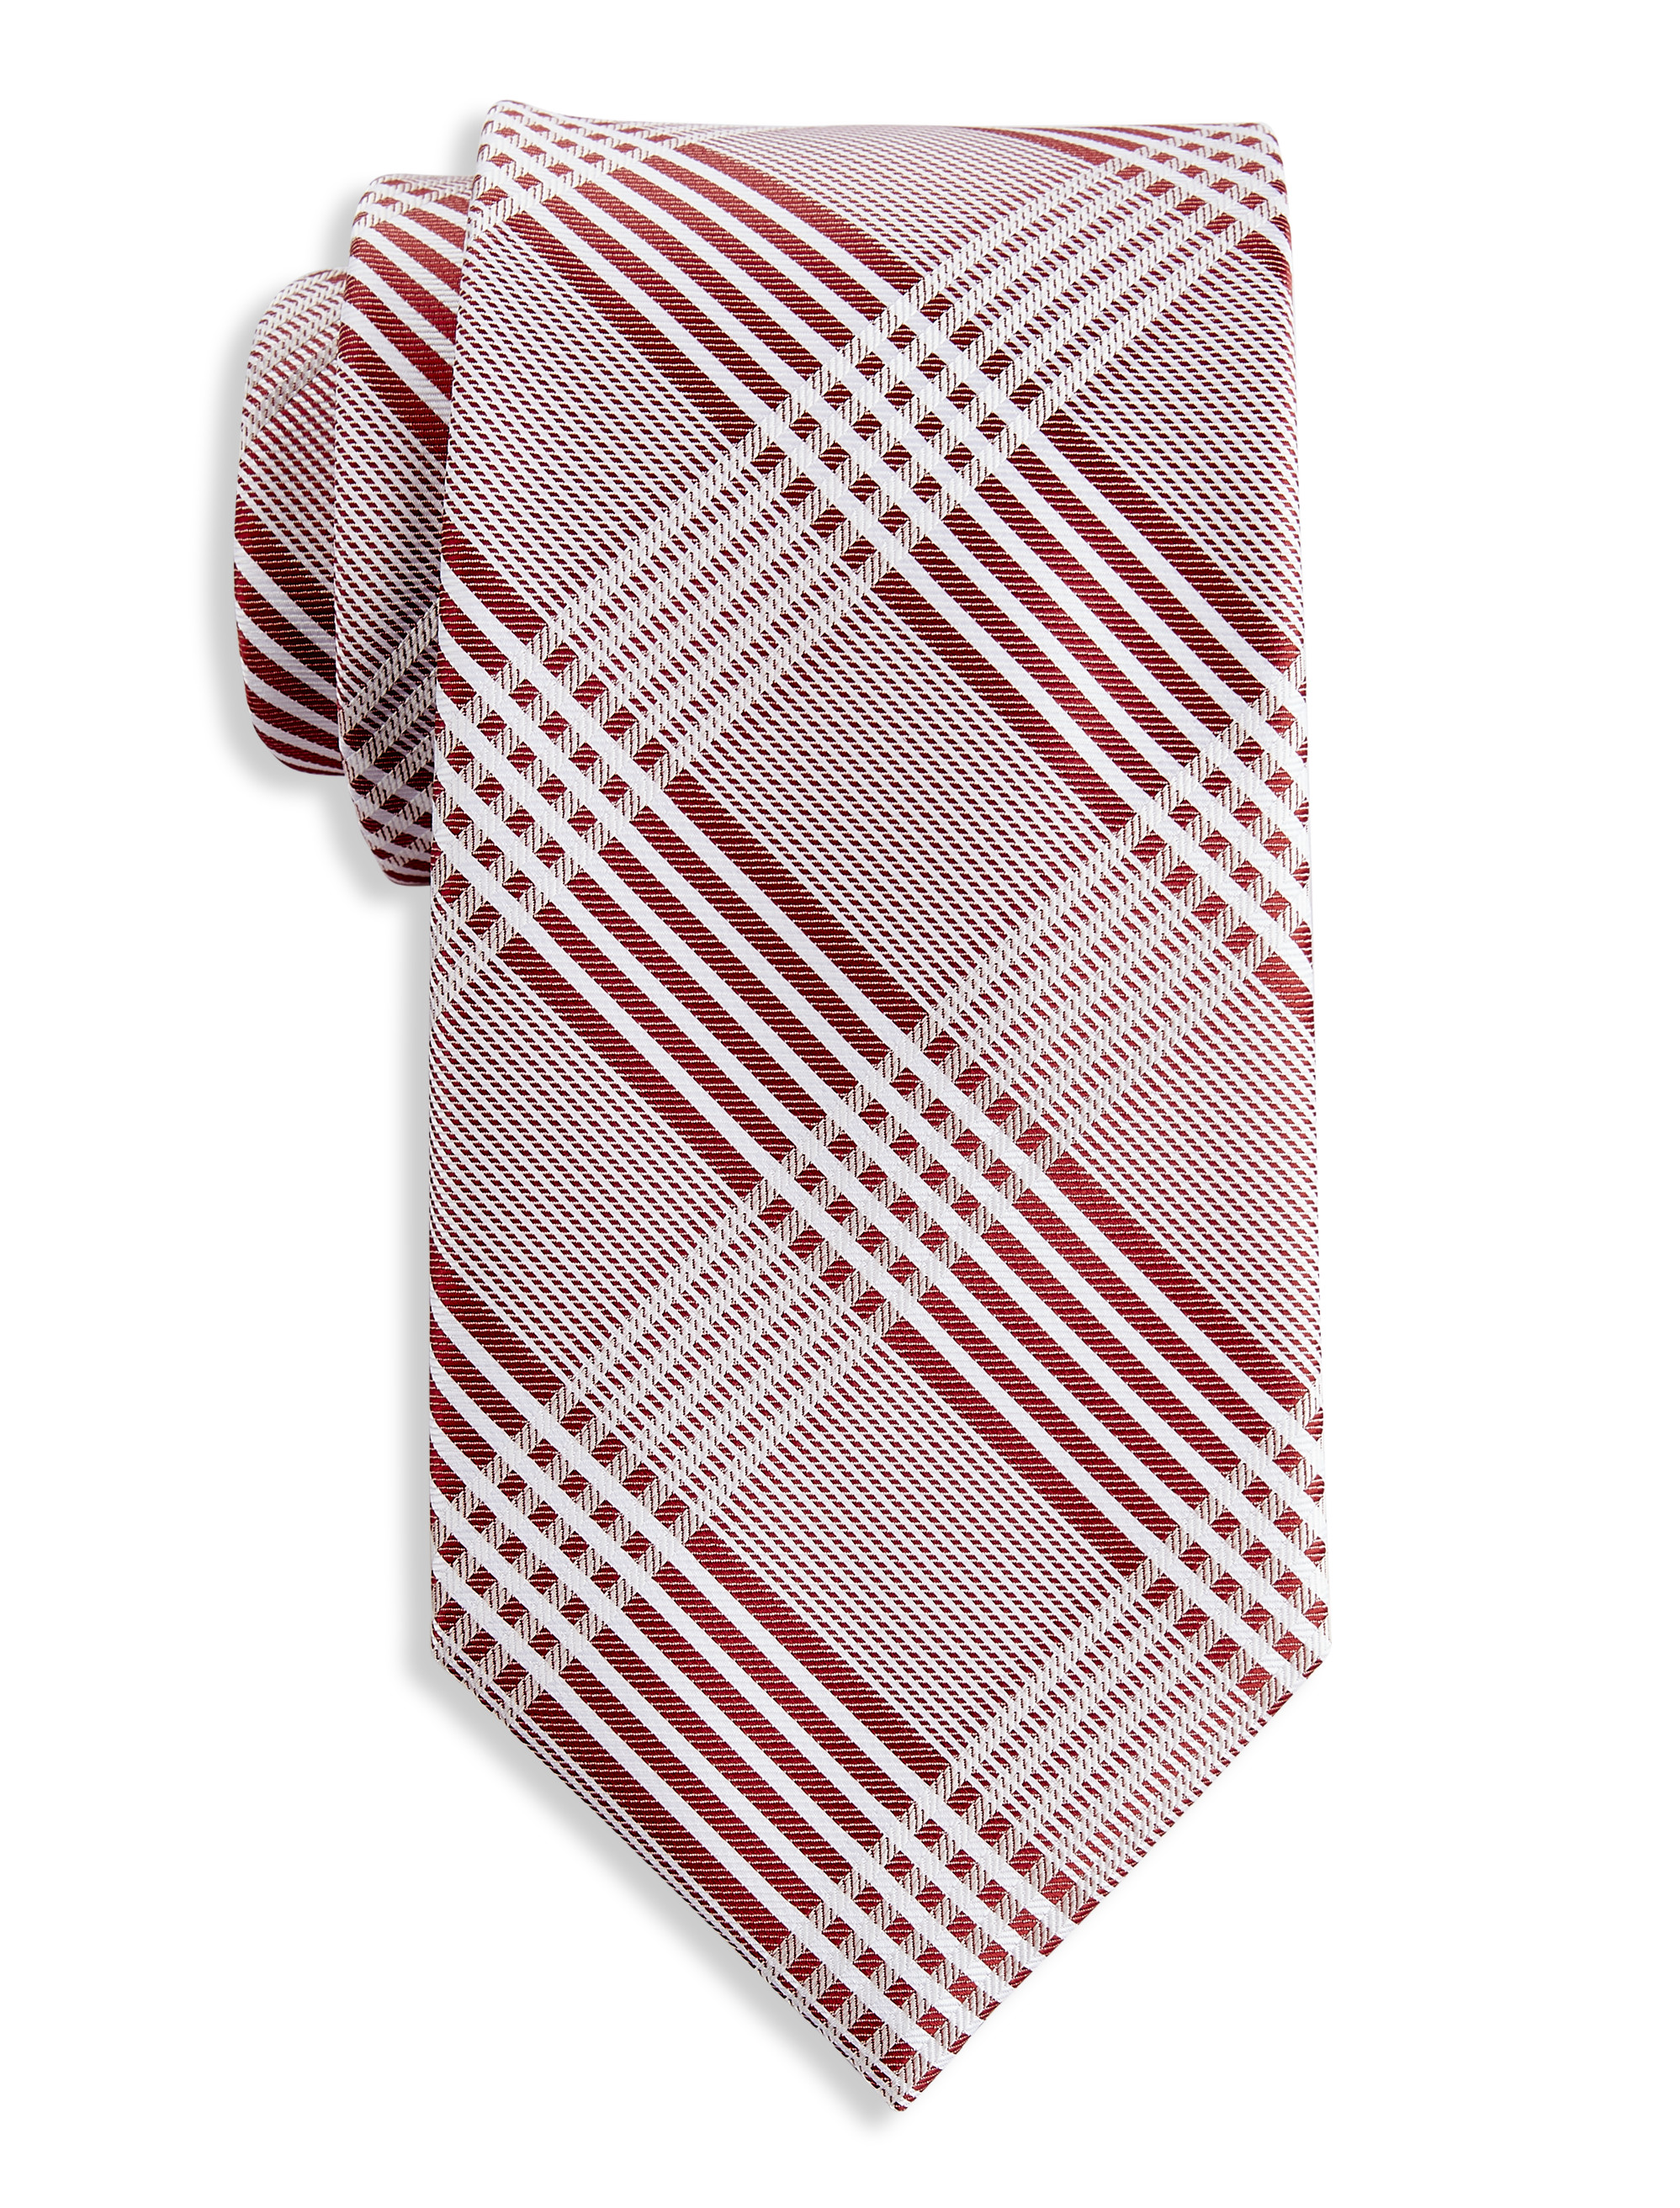 Grounded Plaid Tie